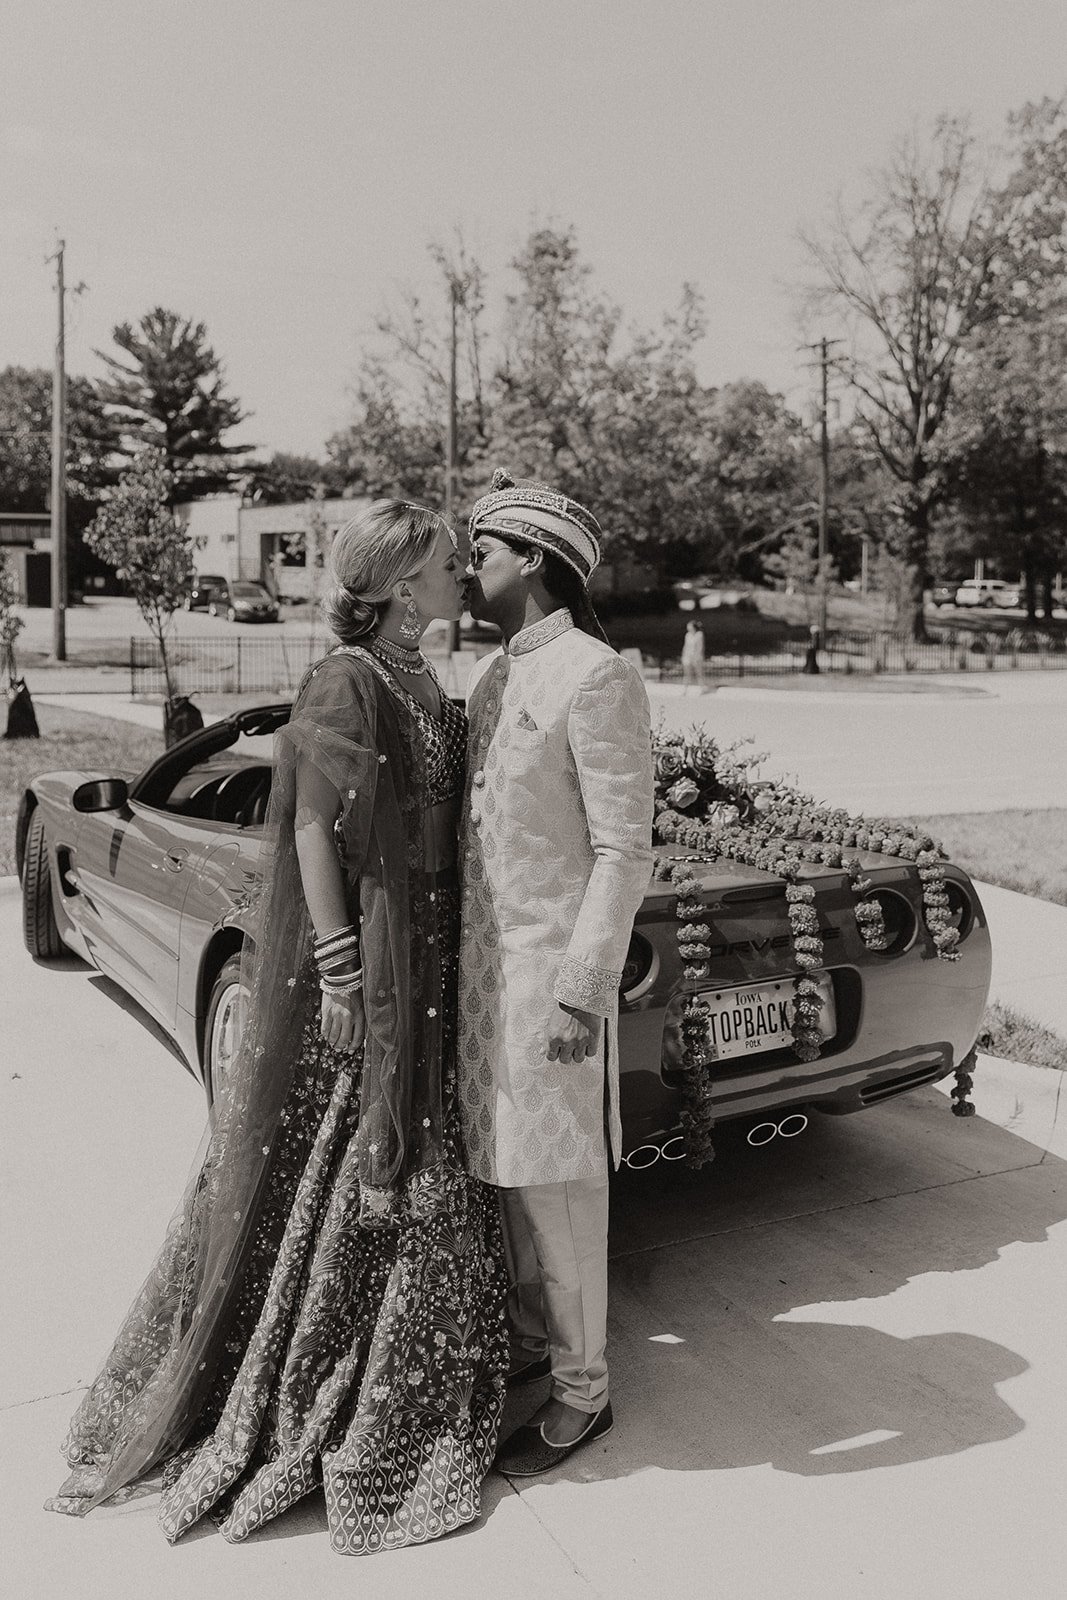 A unique Midwest Wedding Day with Indian elements and details